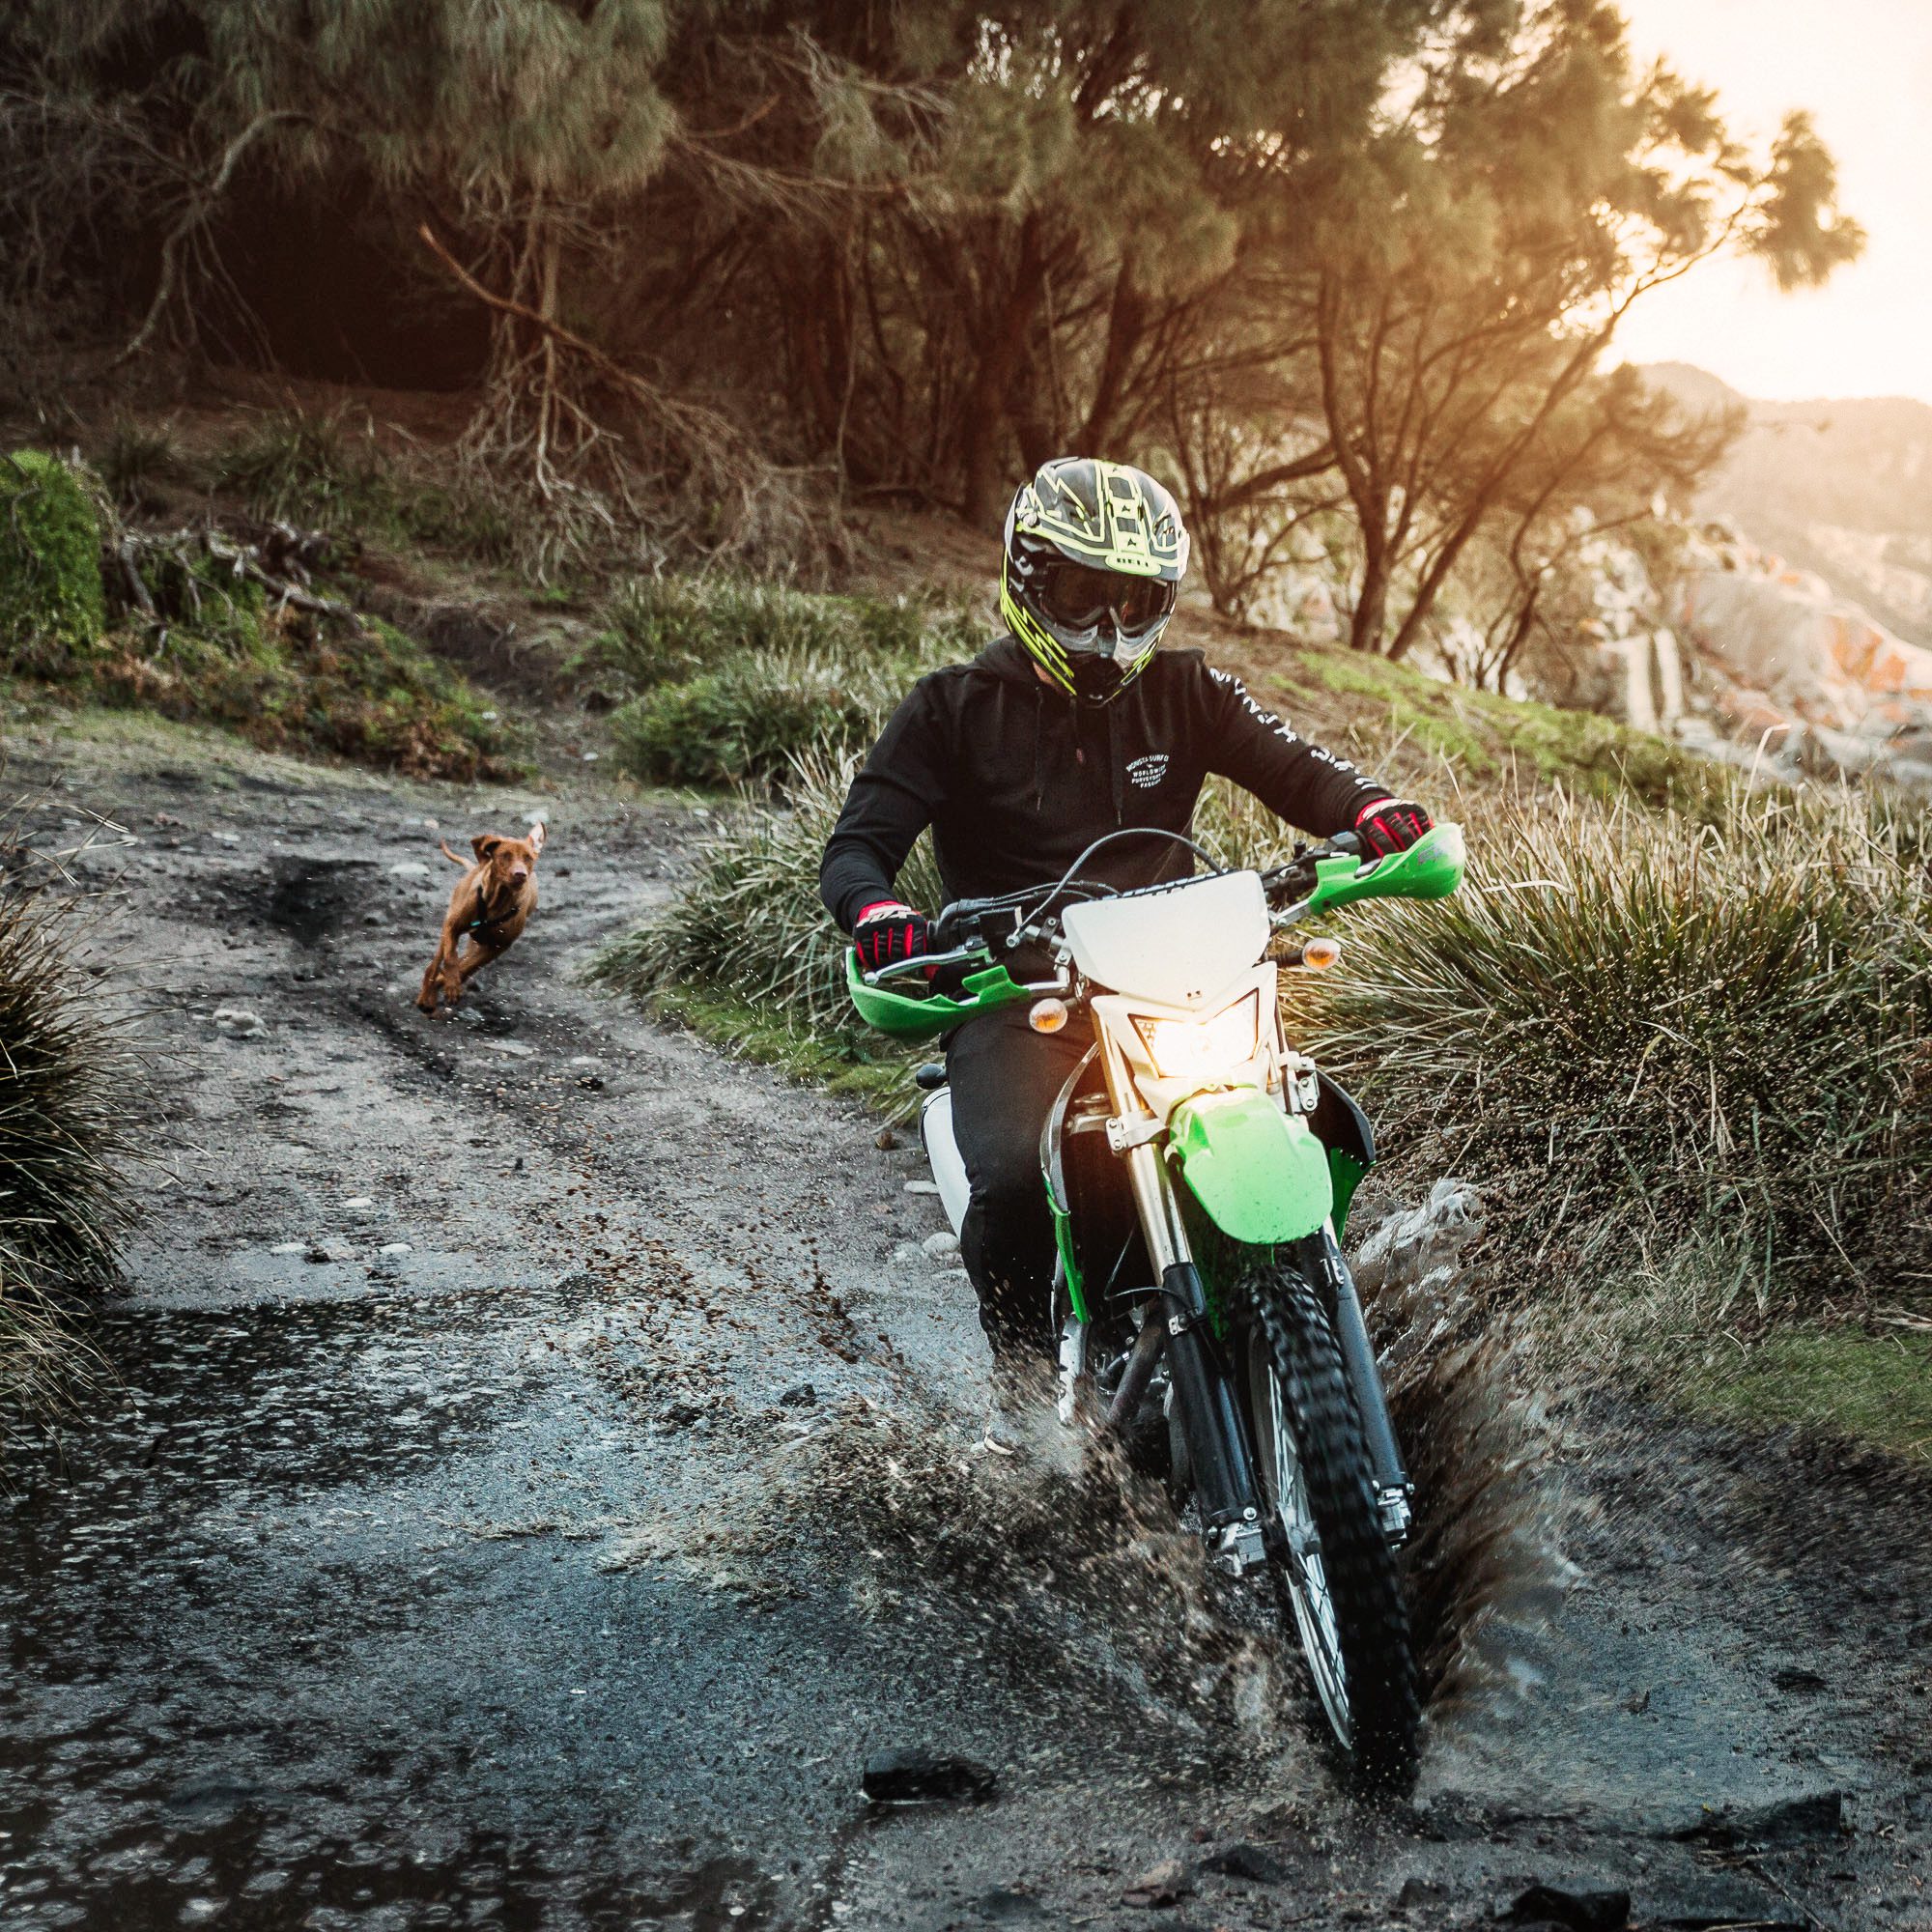 An off-road motorcycle rider in Australia blasts through a puddle as a dog follows along behind